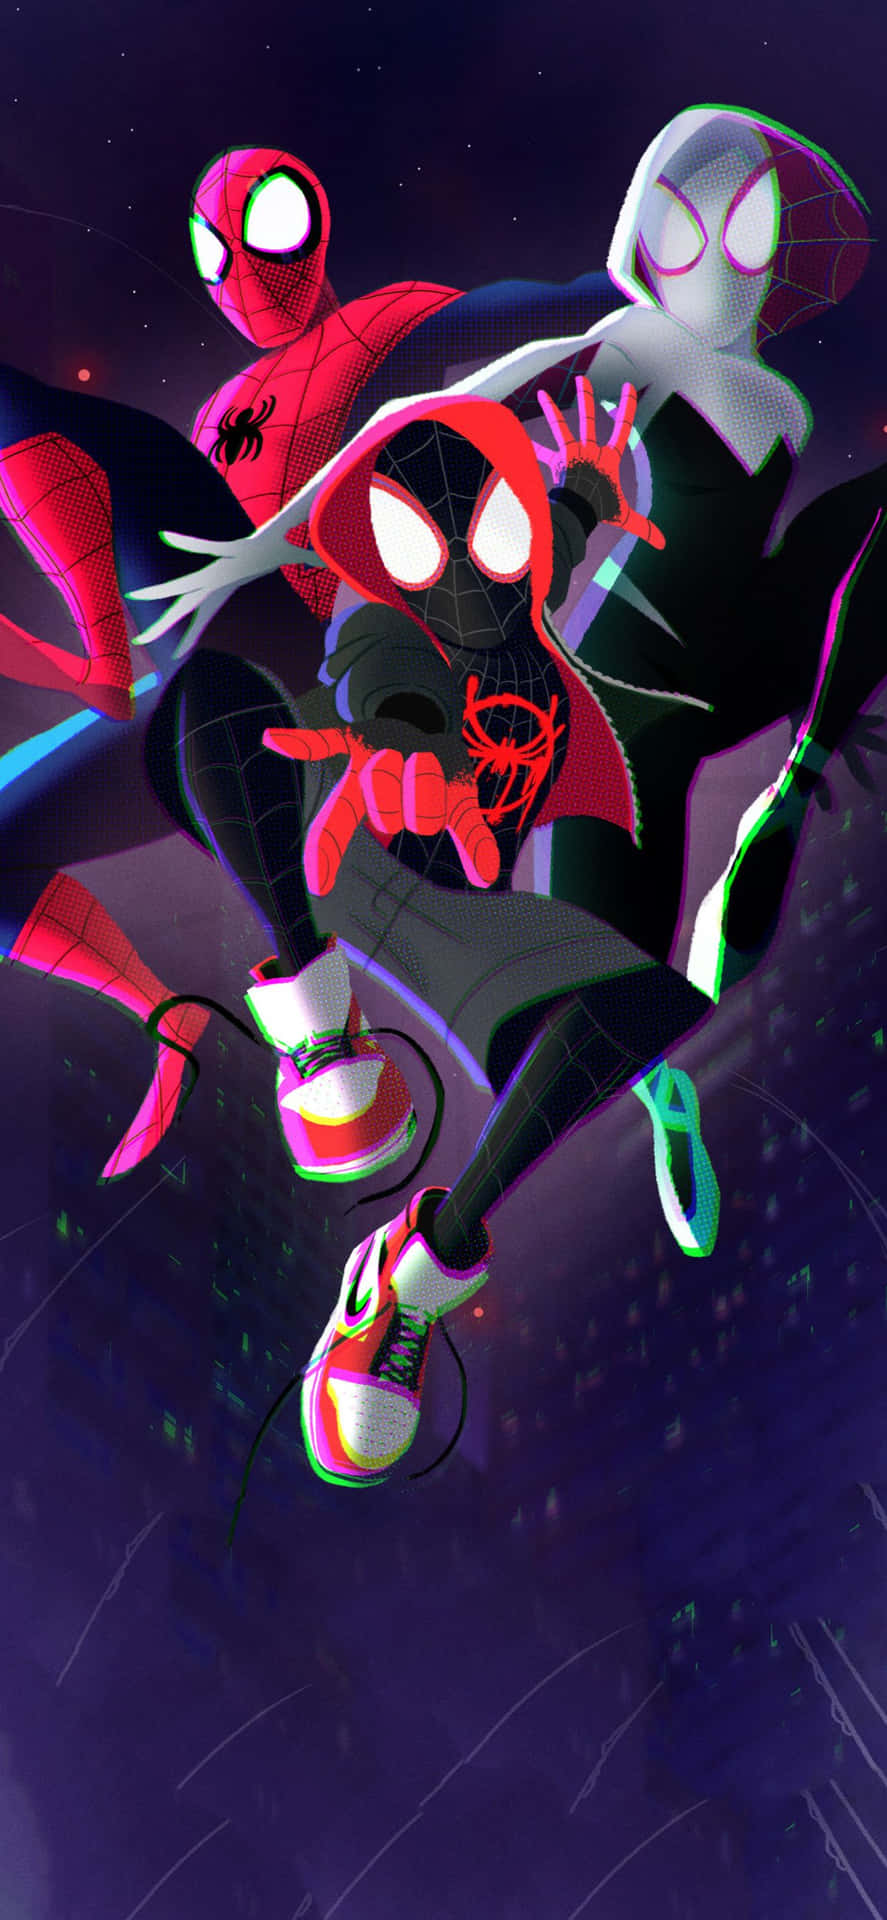 A villainous Spider Man with a mysterious aesthetic Wallpaper